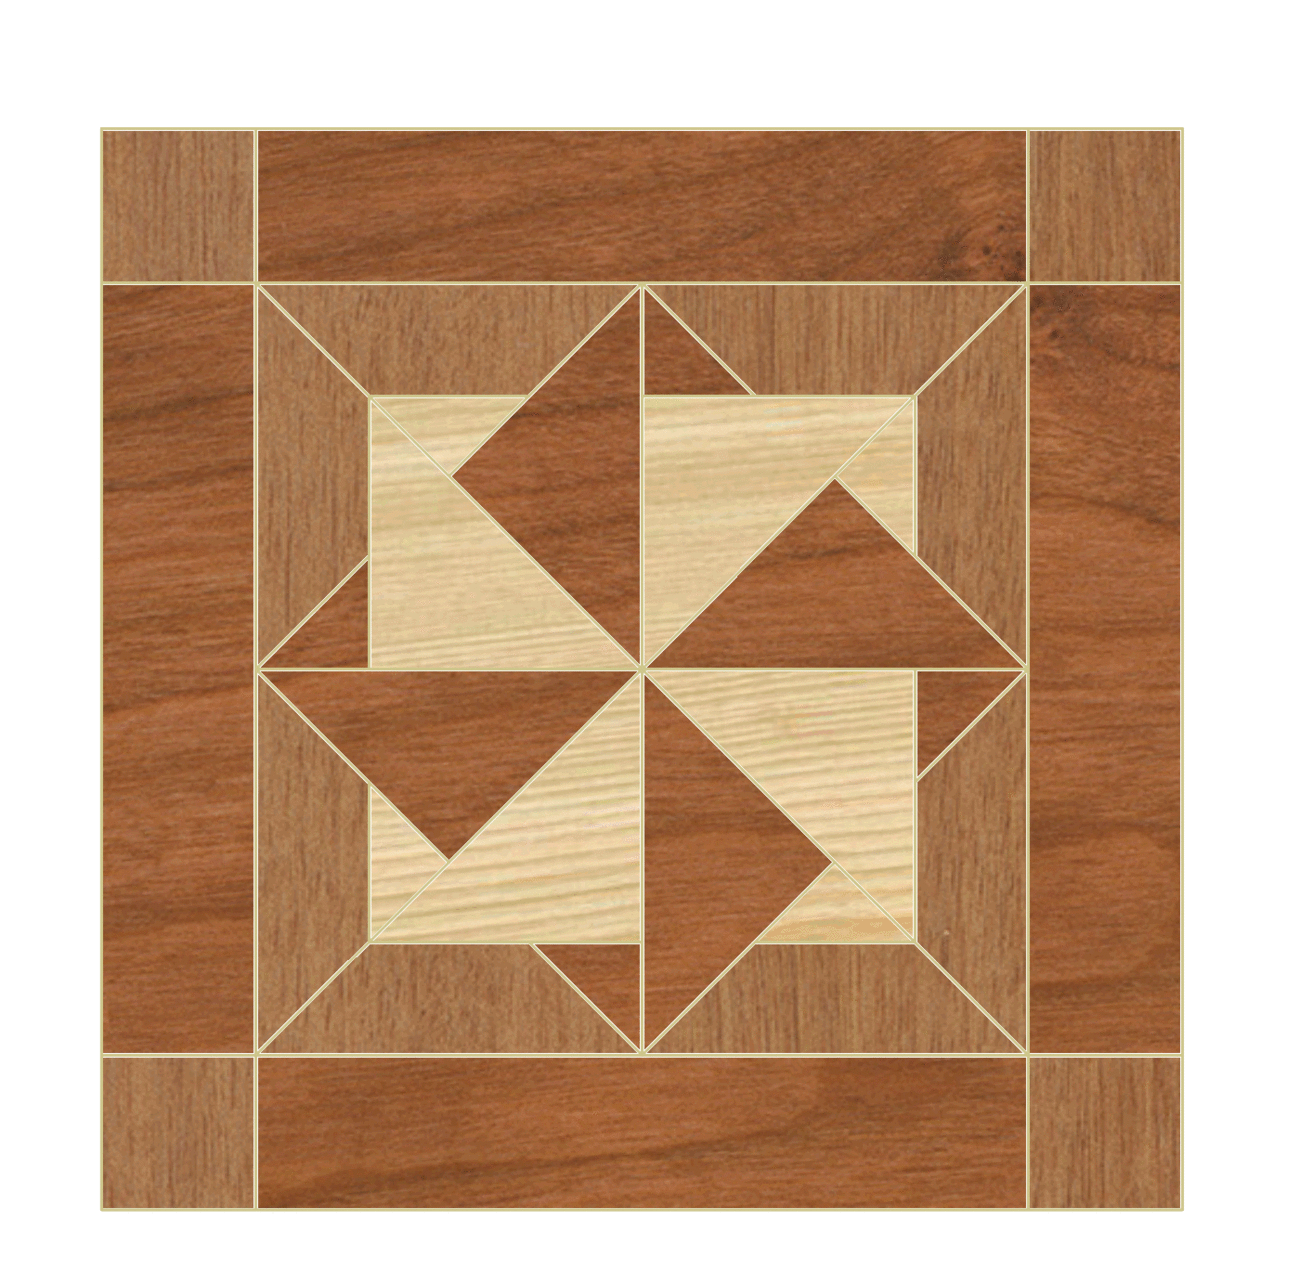 Woodworking quilt projects Main Image